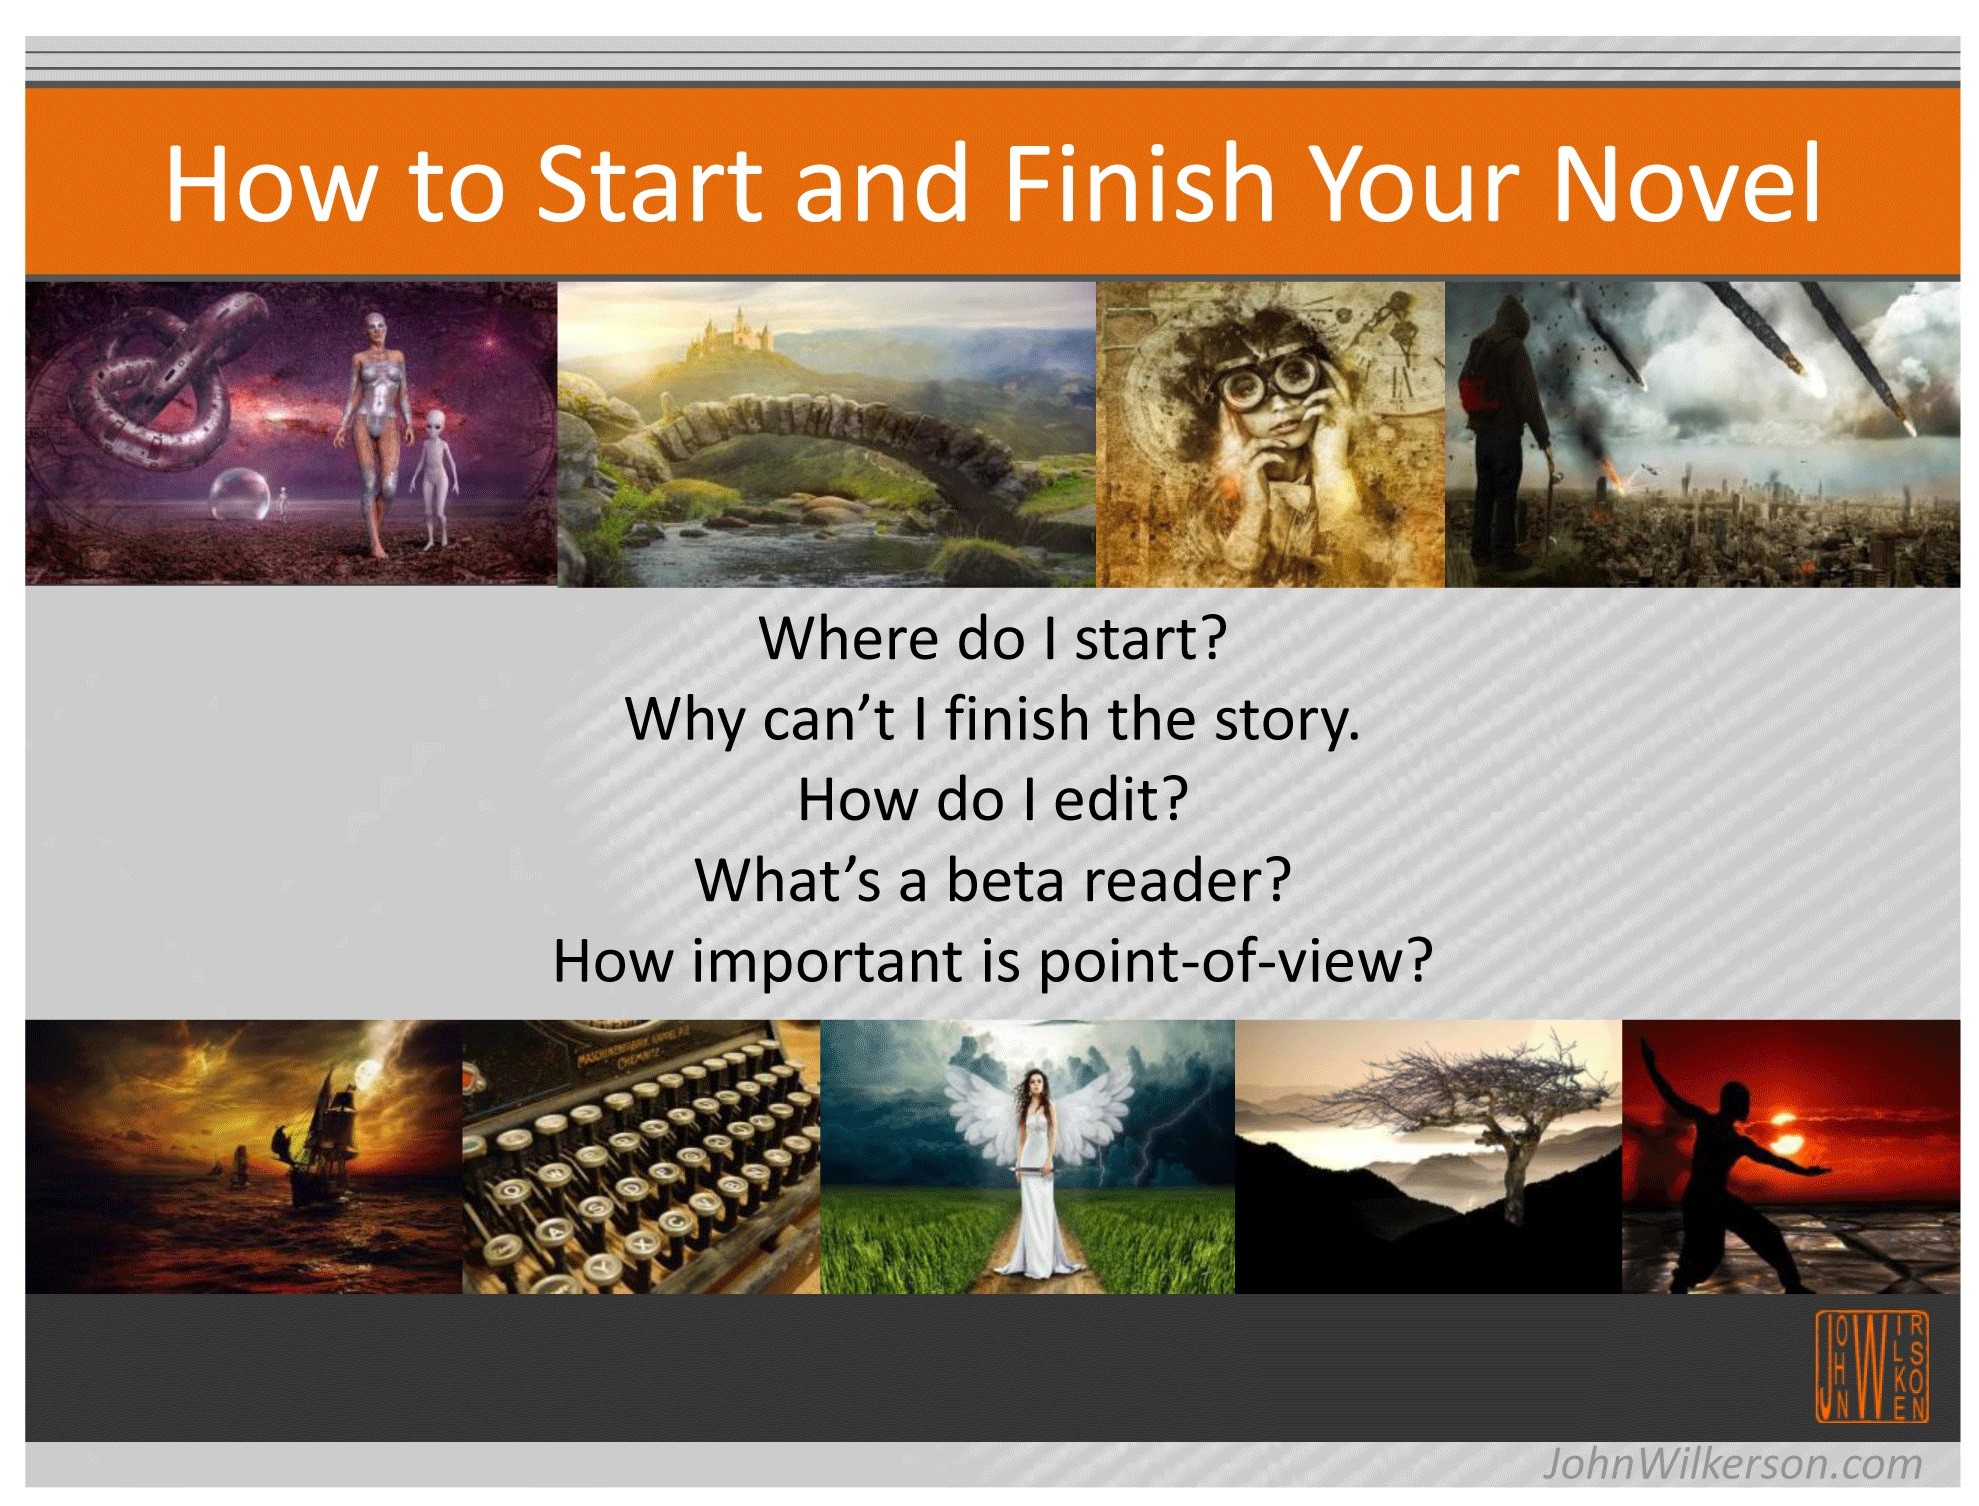 How to start and finishe your book or novel john wilkerson author